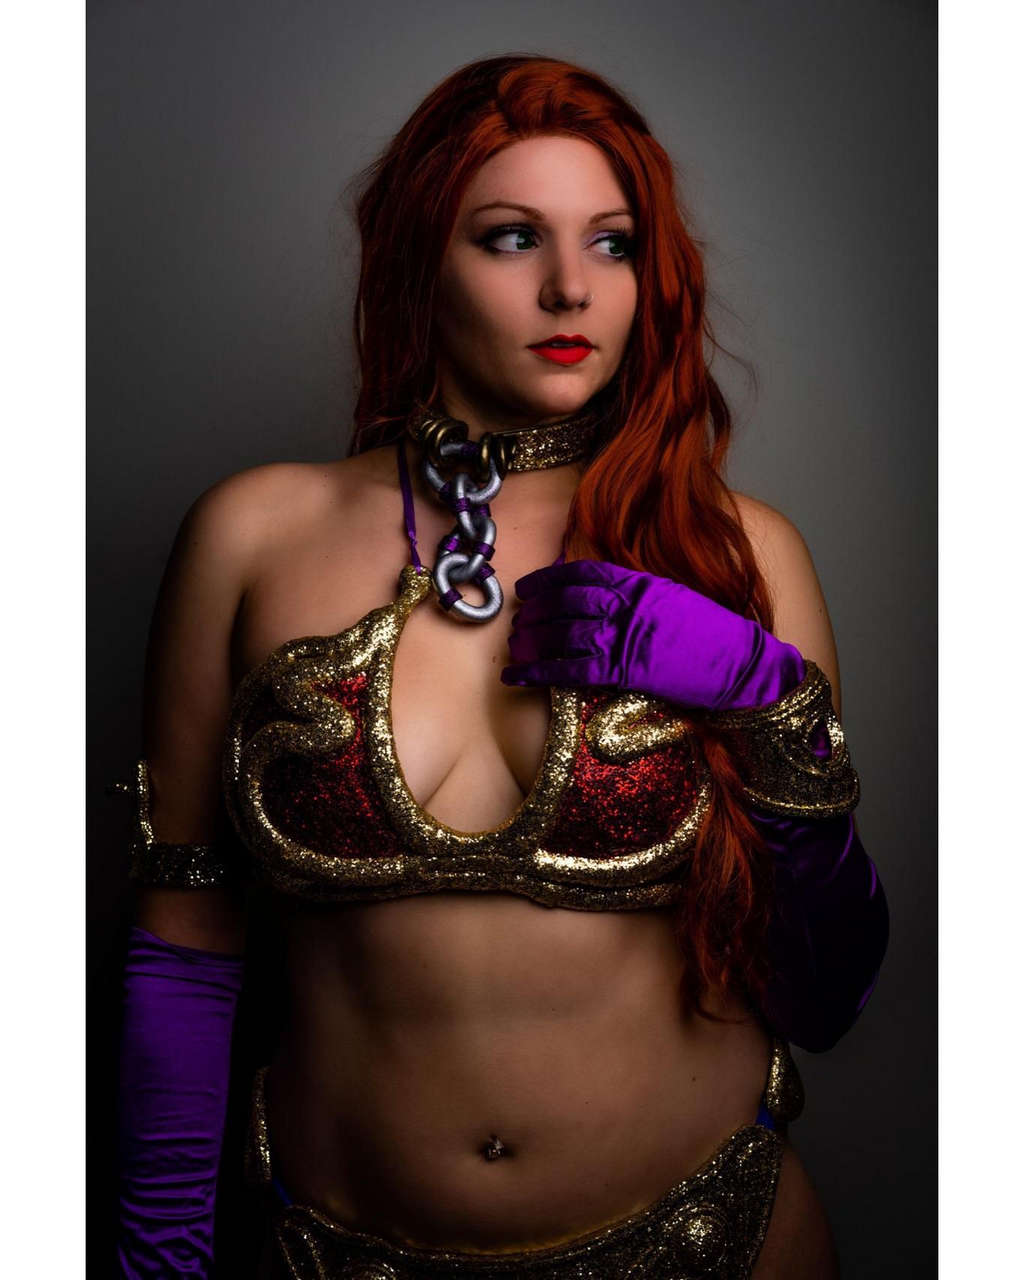 Self Slave Leia Jessica Rabbit Mashup Photo By Peter Giang Evilsanit